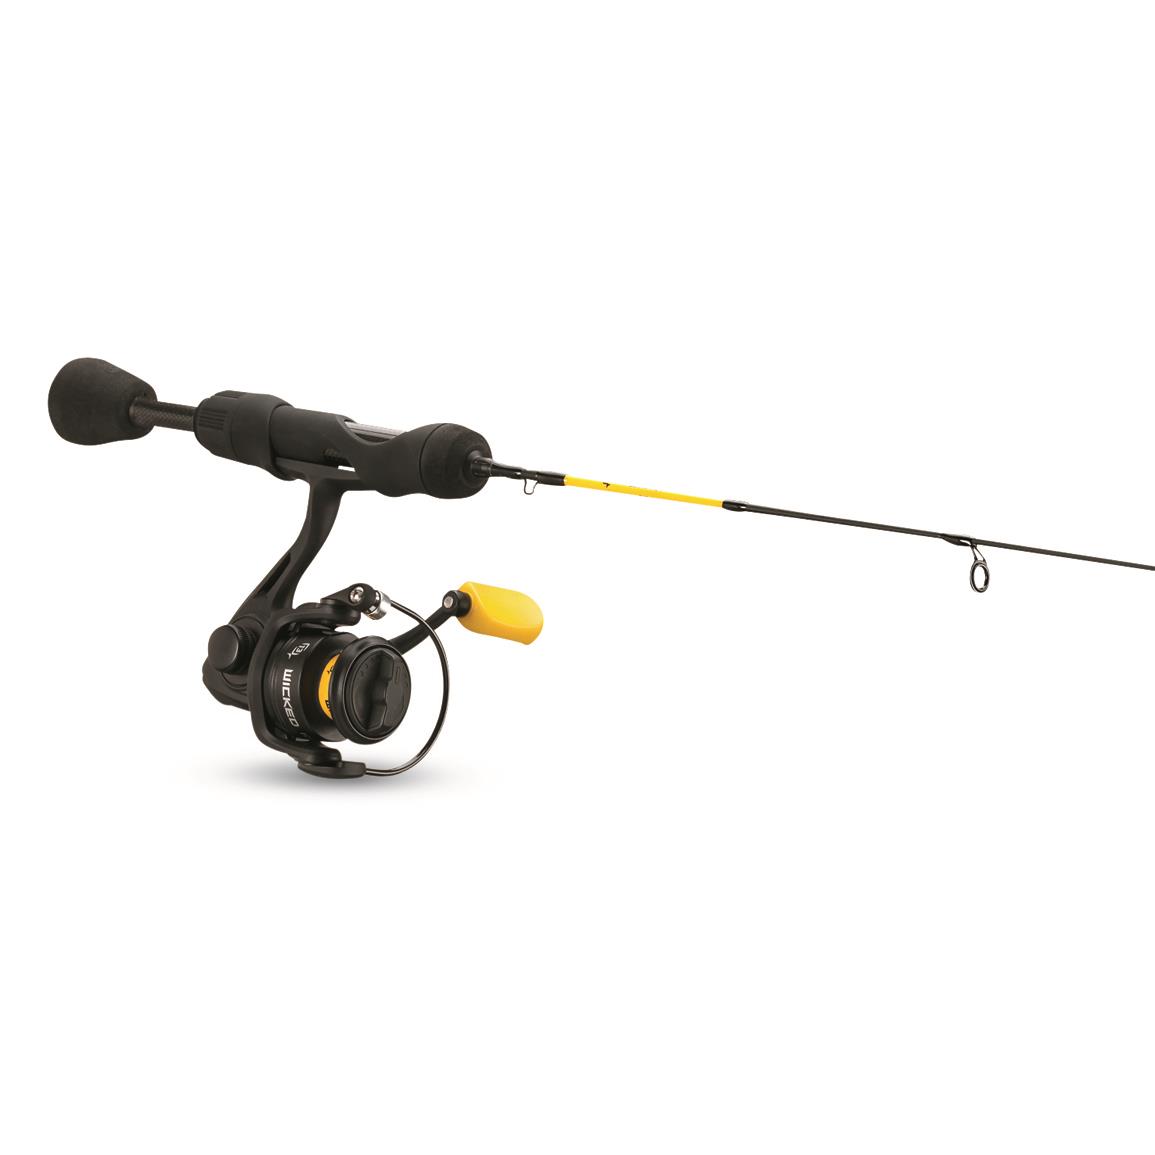 Clam Jason Mitchell Dead Meat Graphite Ice Fishing Combo, 27 Length, Light  - 728431, Ice Fishing Combos at Sportsman's Guide